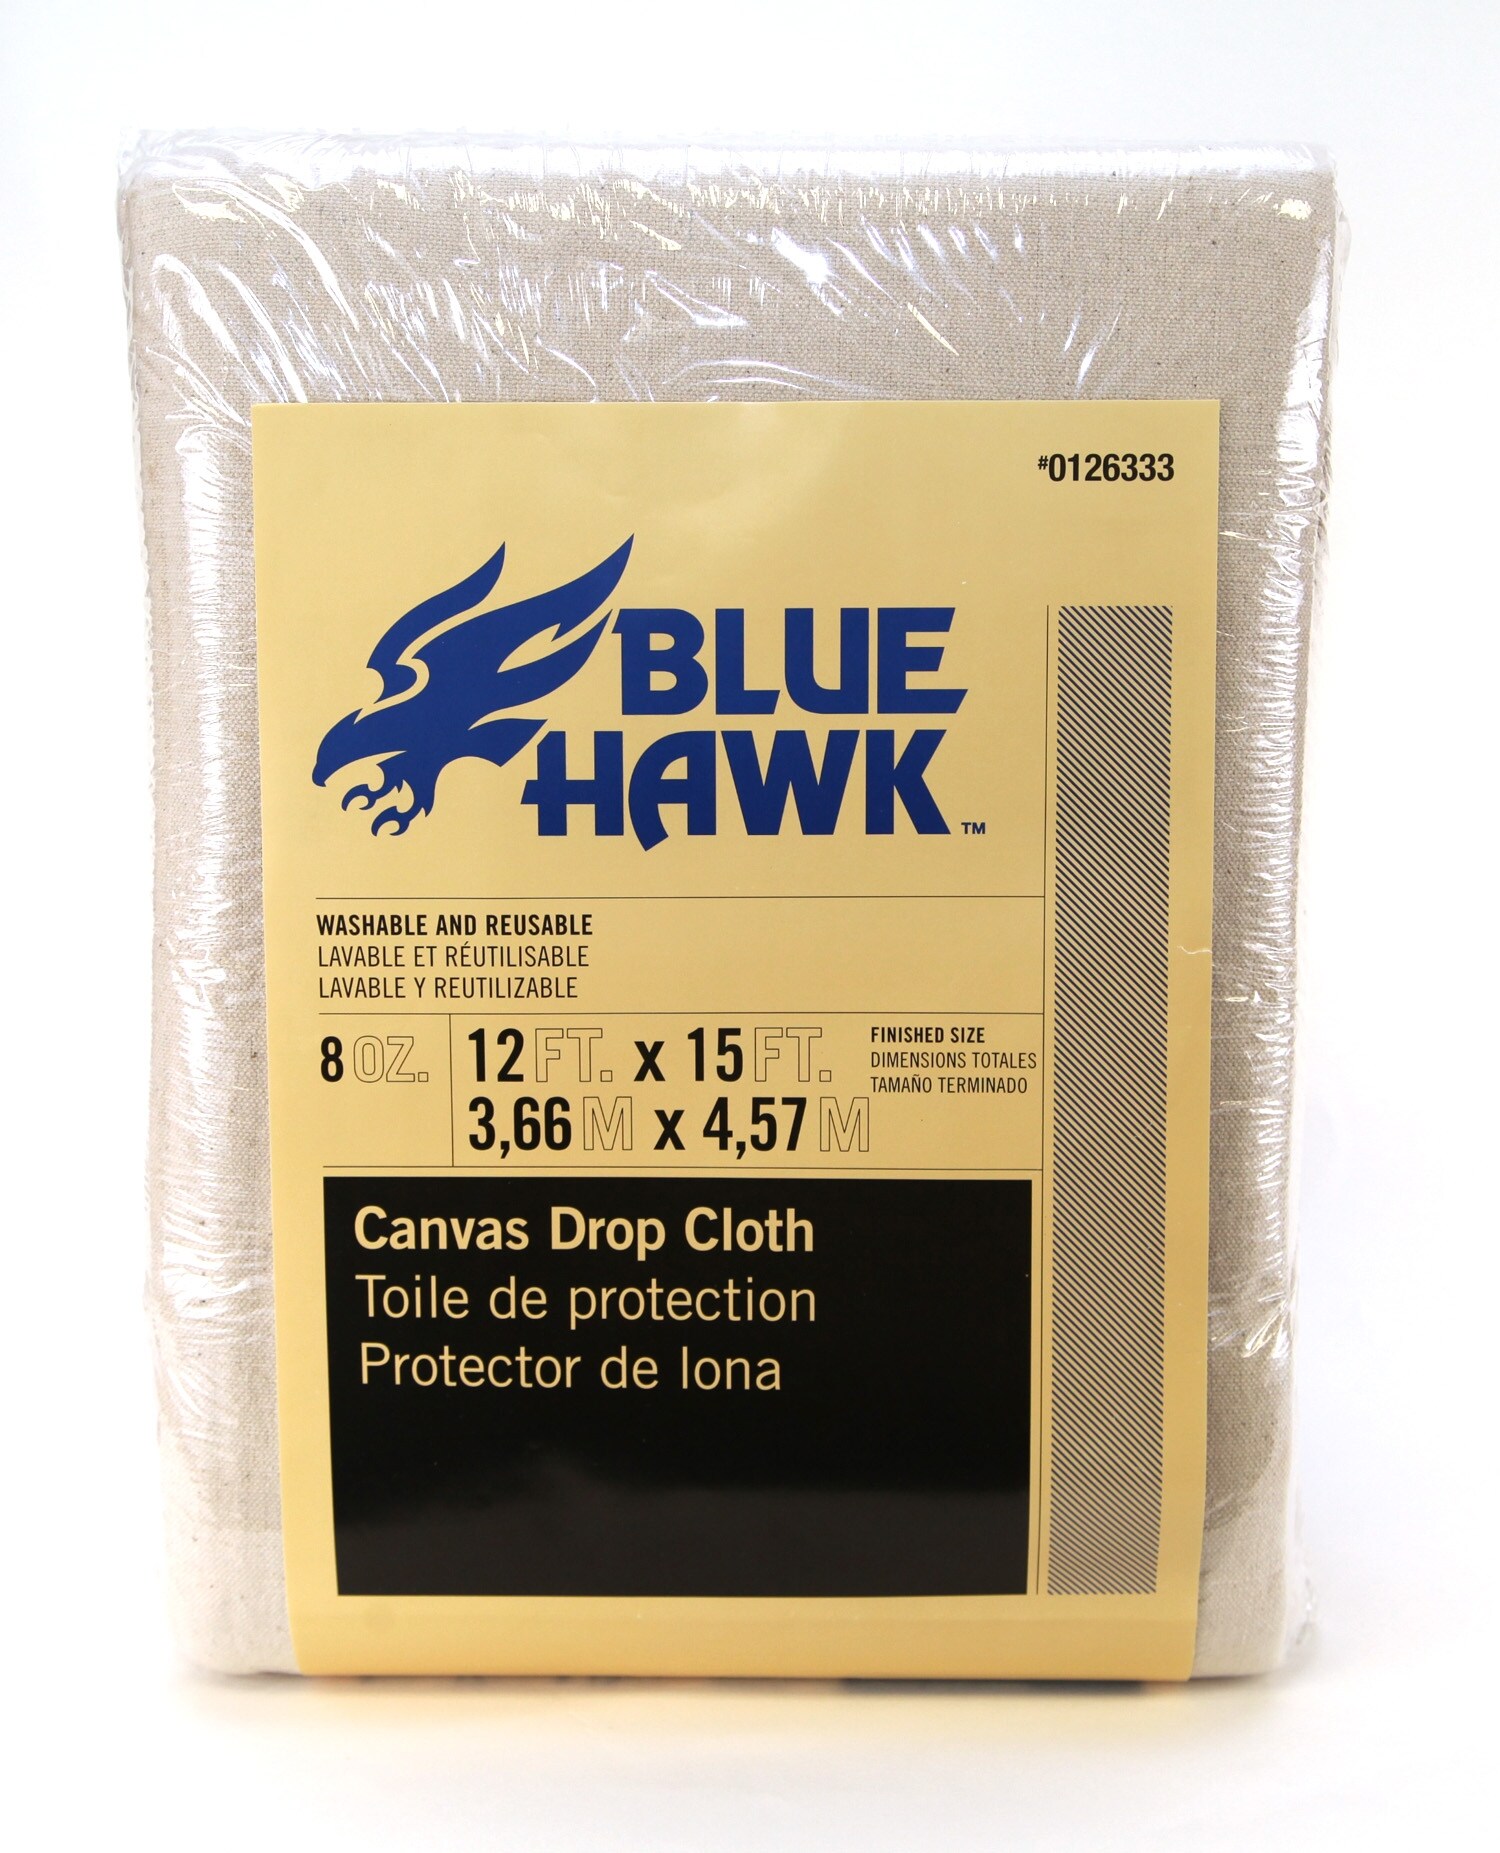 Tape Wide 1.5 Inches, Masking Blue Painters Tape Bulk Pack, 6 Rolls X 1.5  Inches X 55 Yards (330 Total Yards)